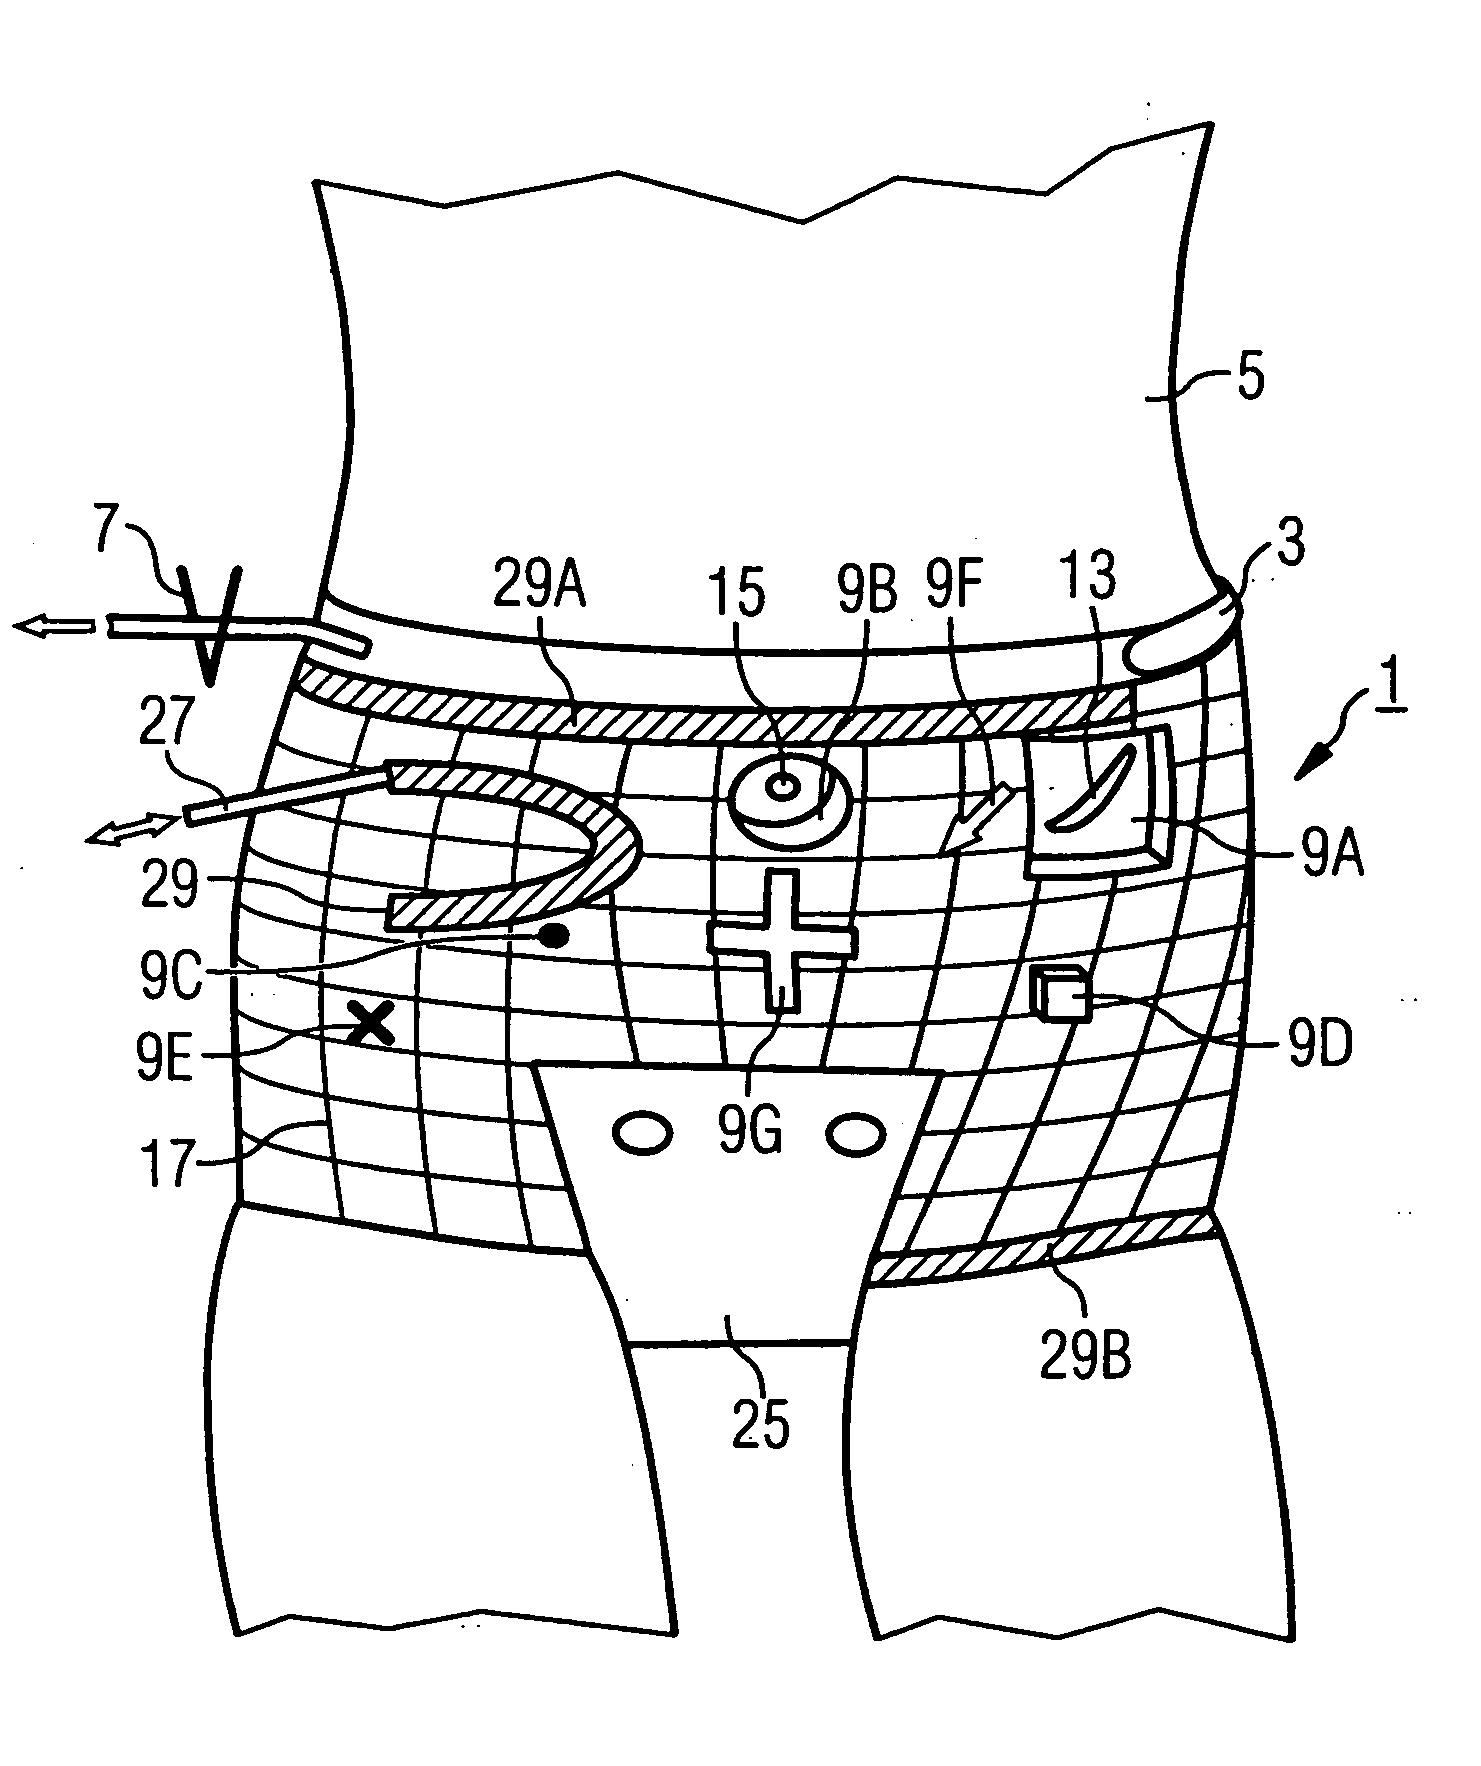 Positioning device for positioning a patient